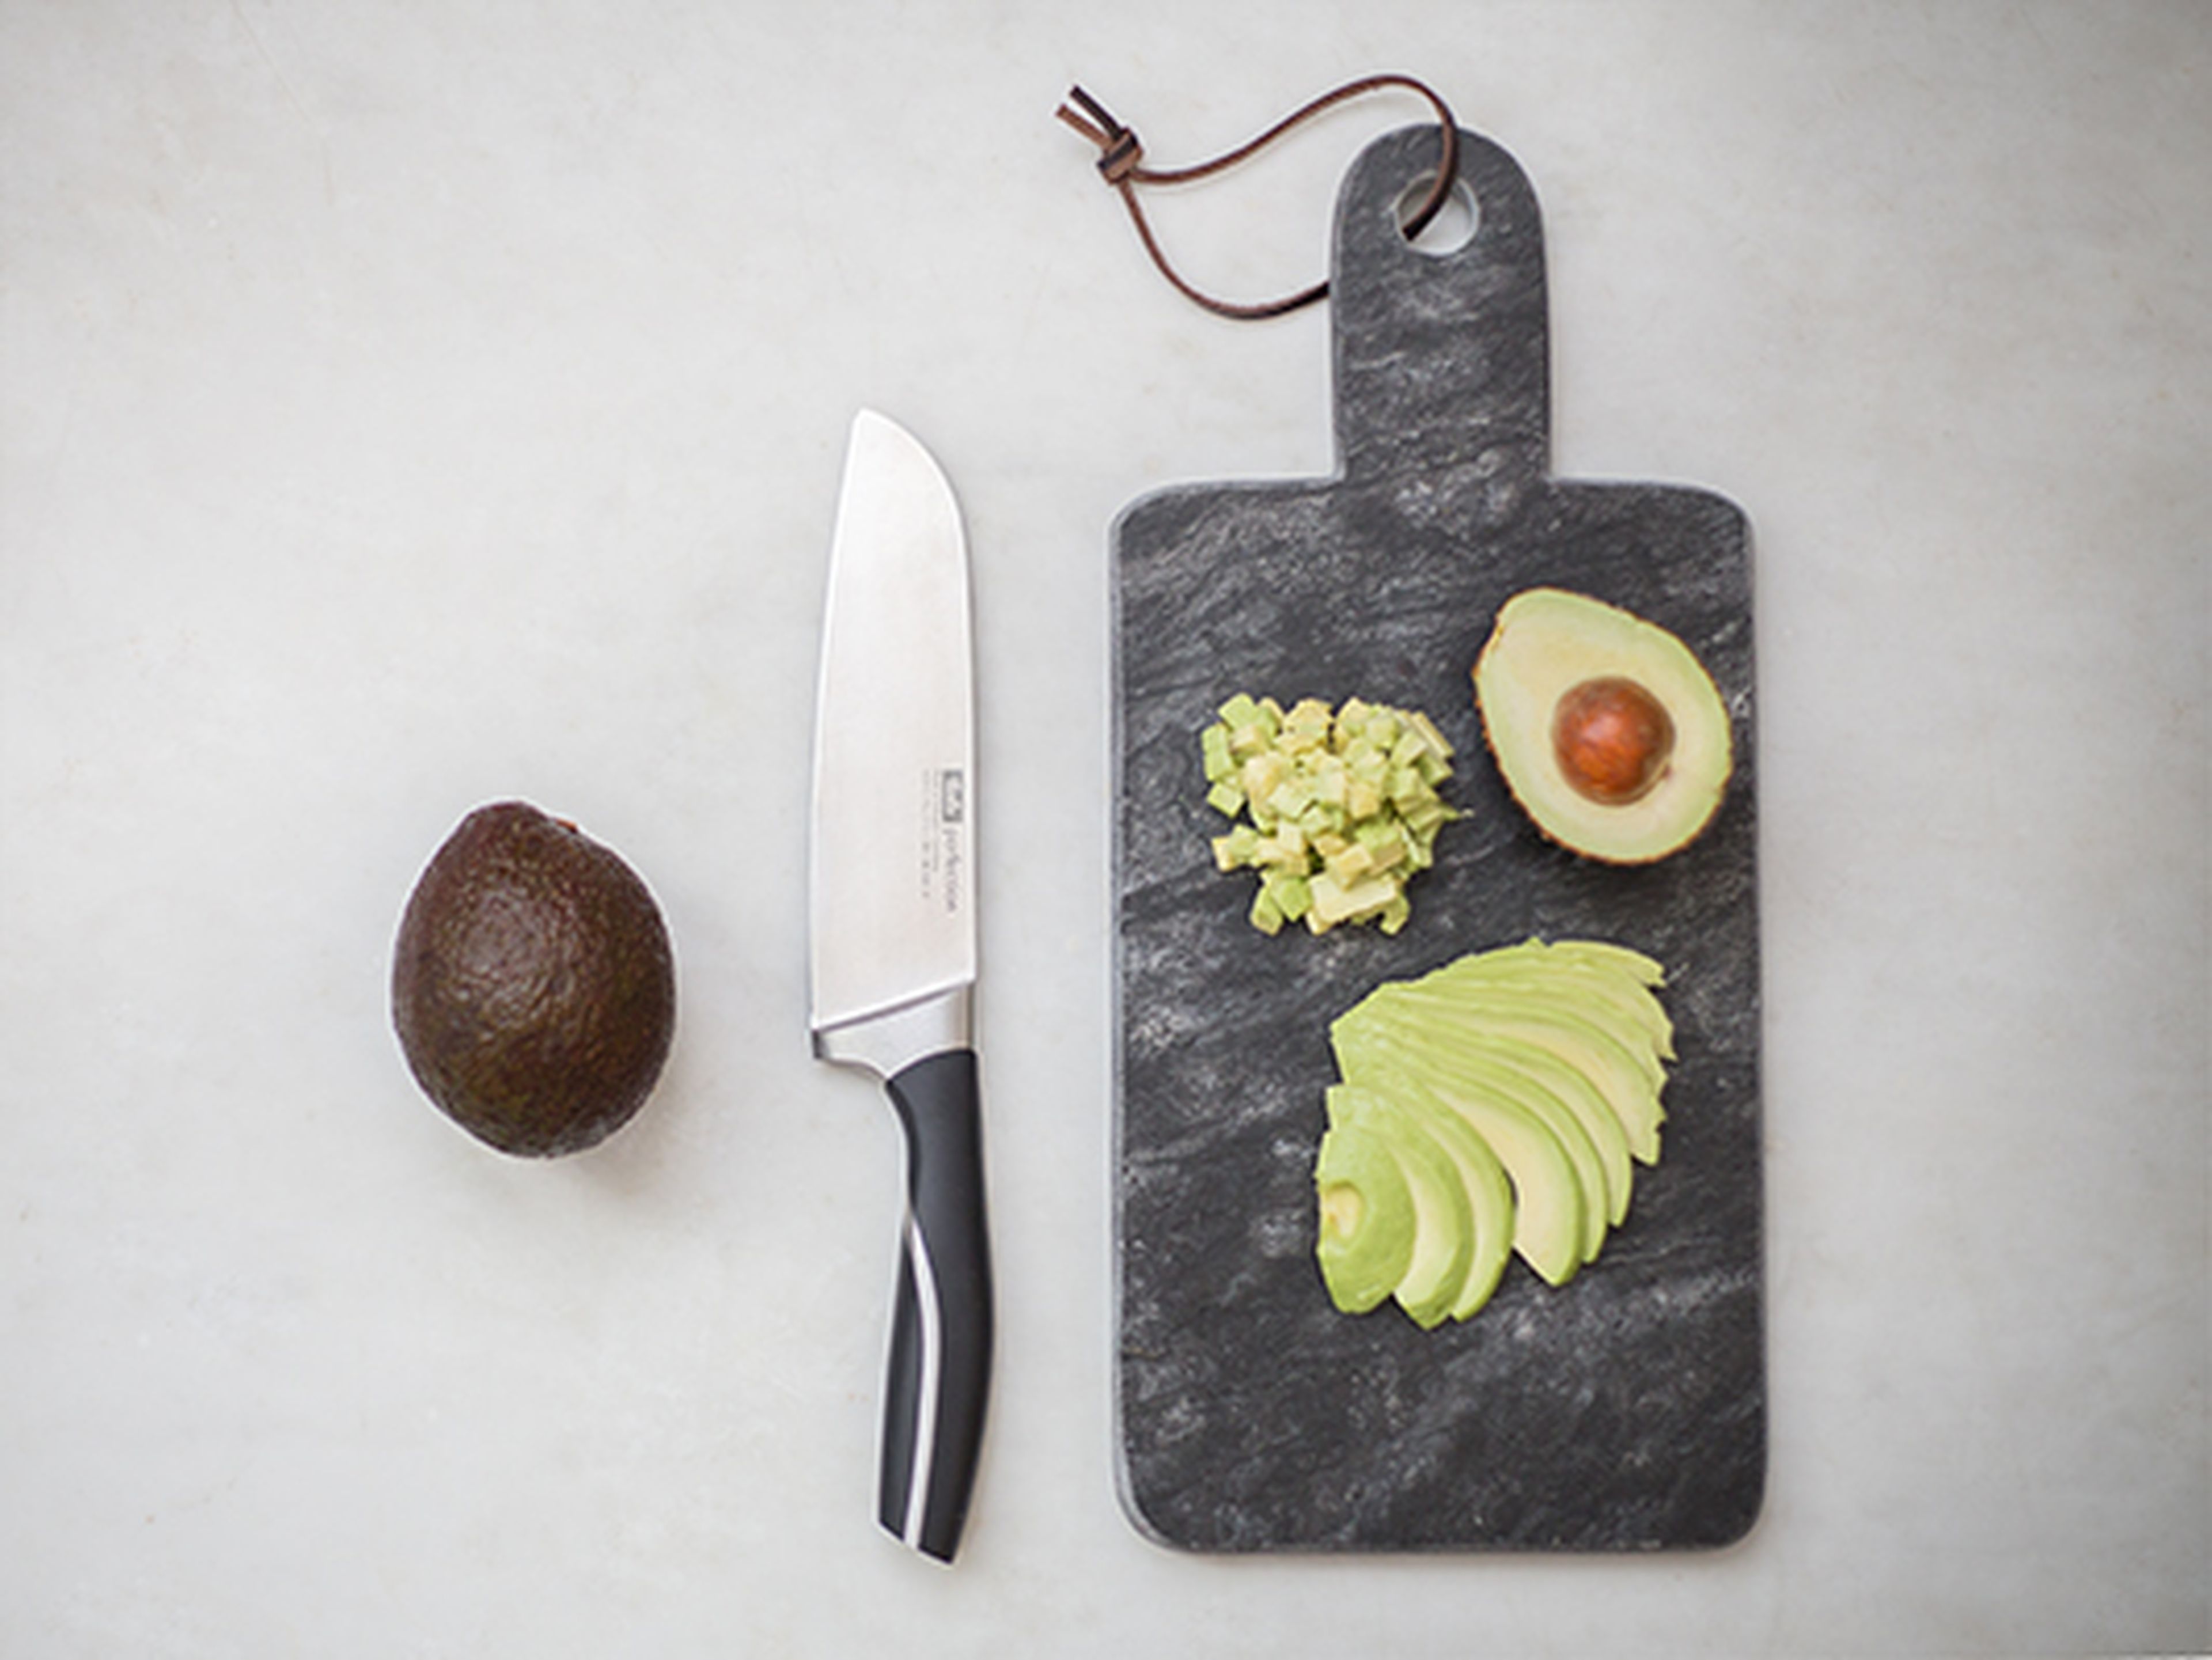 How to pit and cut an avocado